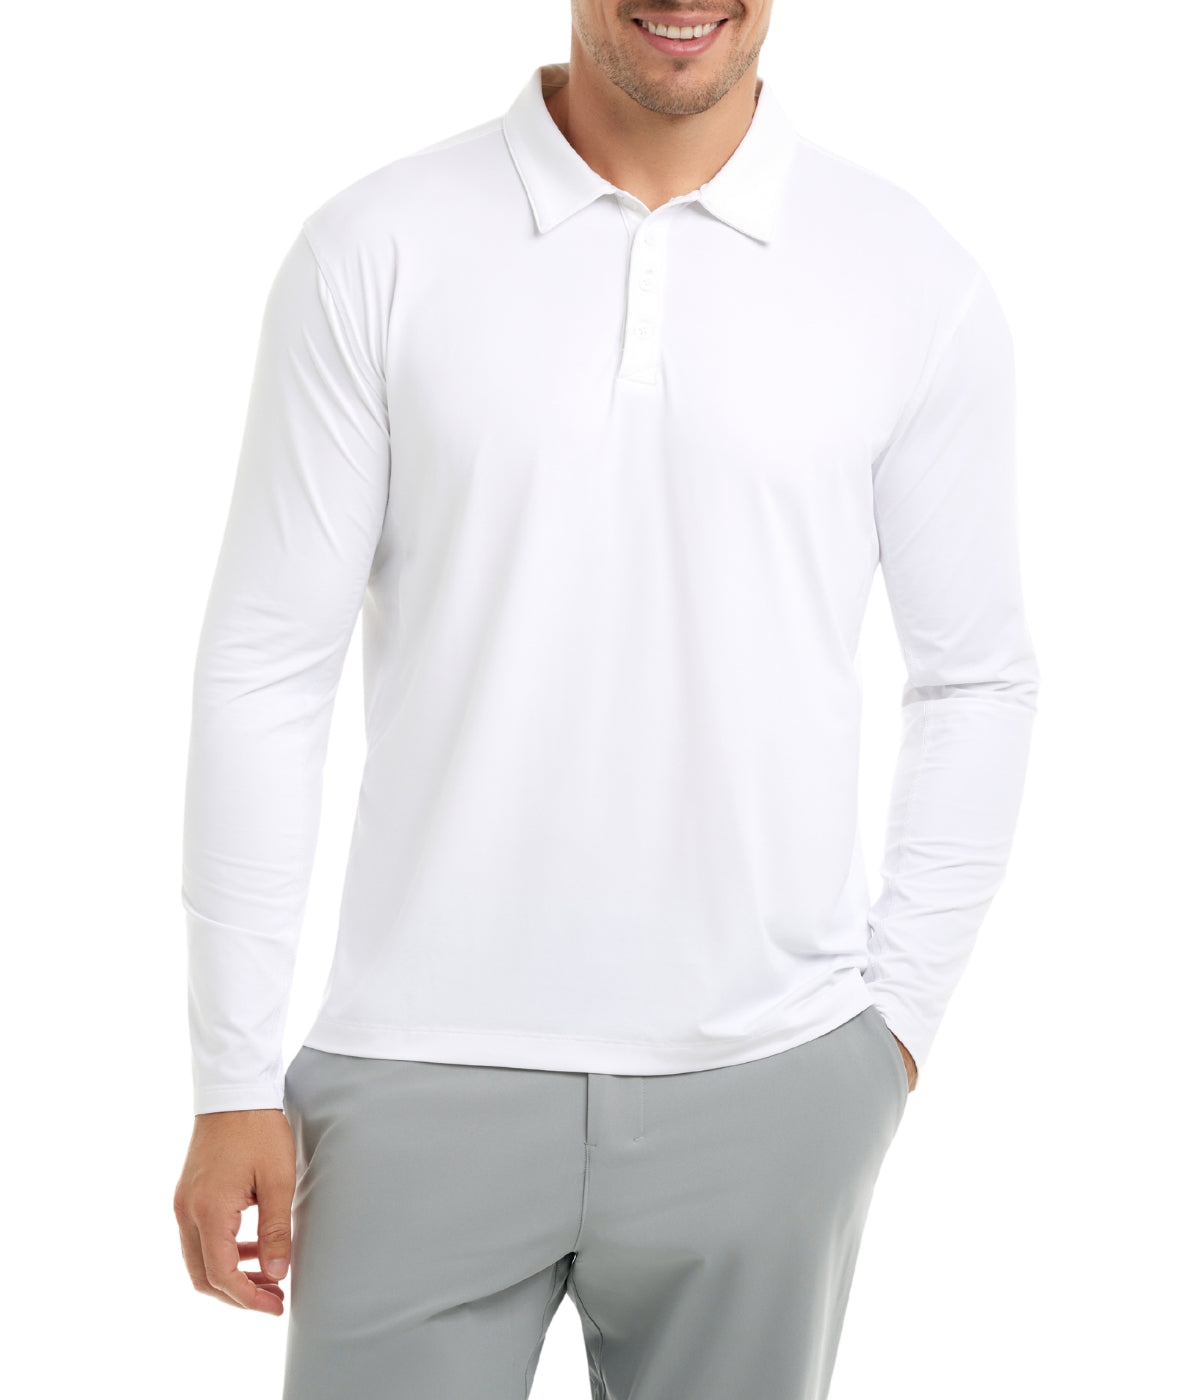 BloqUV Men's UPF 50+ Sun Protection Collared Long Sleeve Polo-2X-White-1